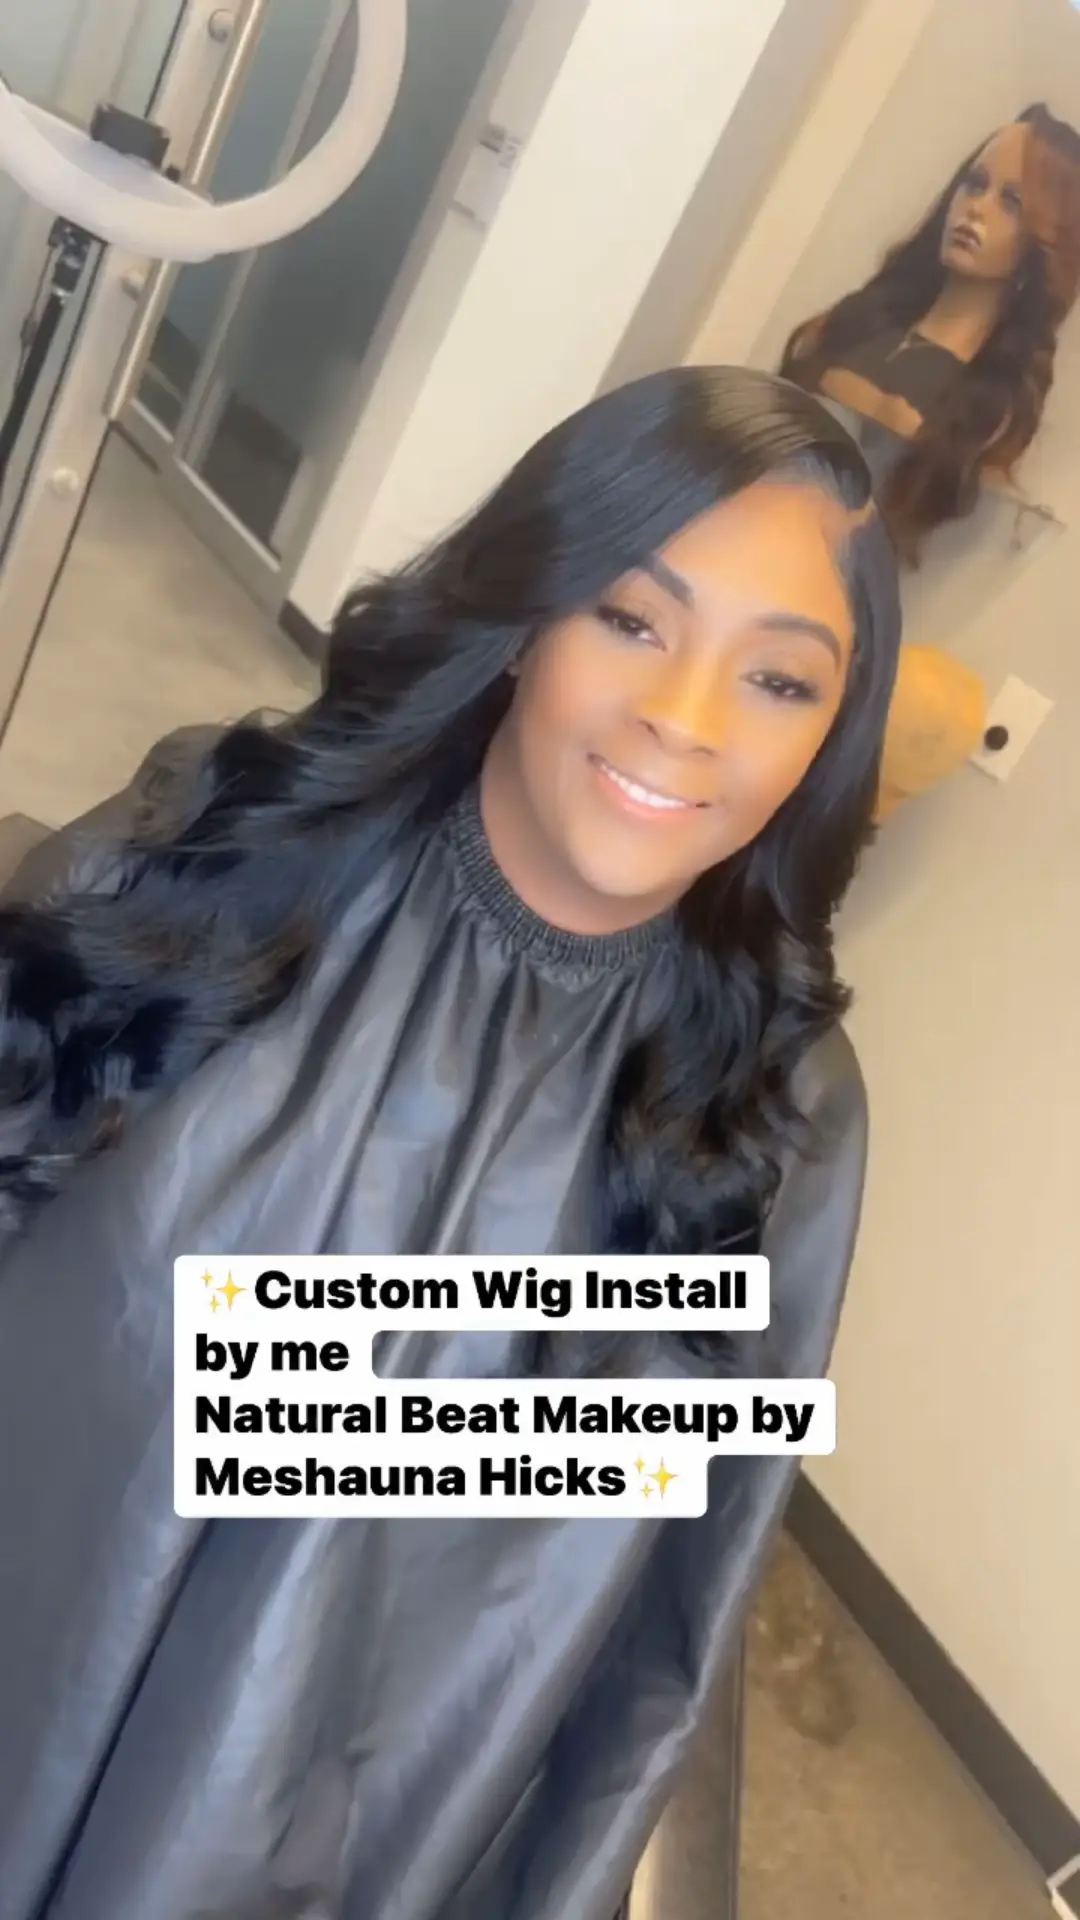 Glueless Wig install ✨, Article posted by AnnWrightJoiner